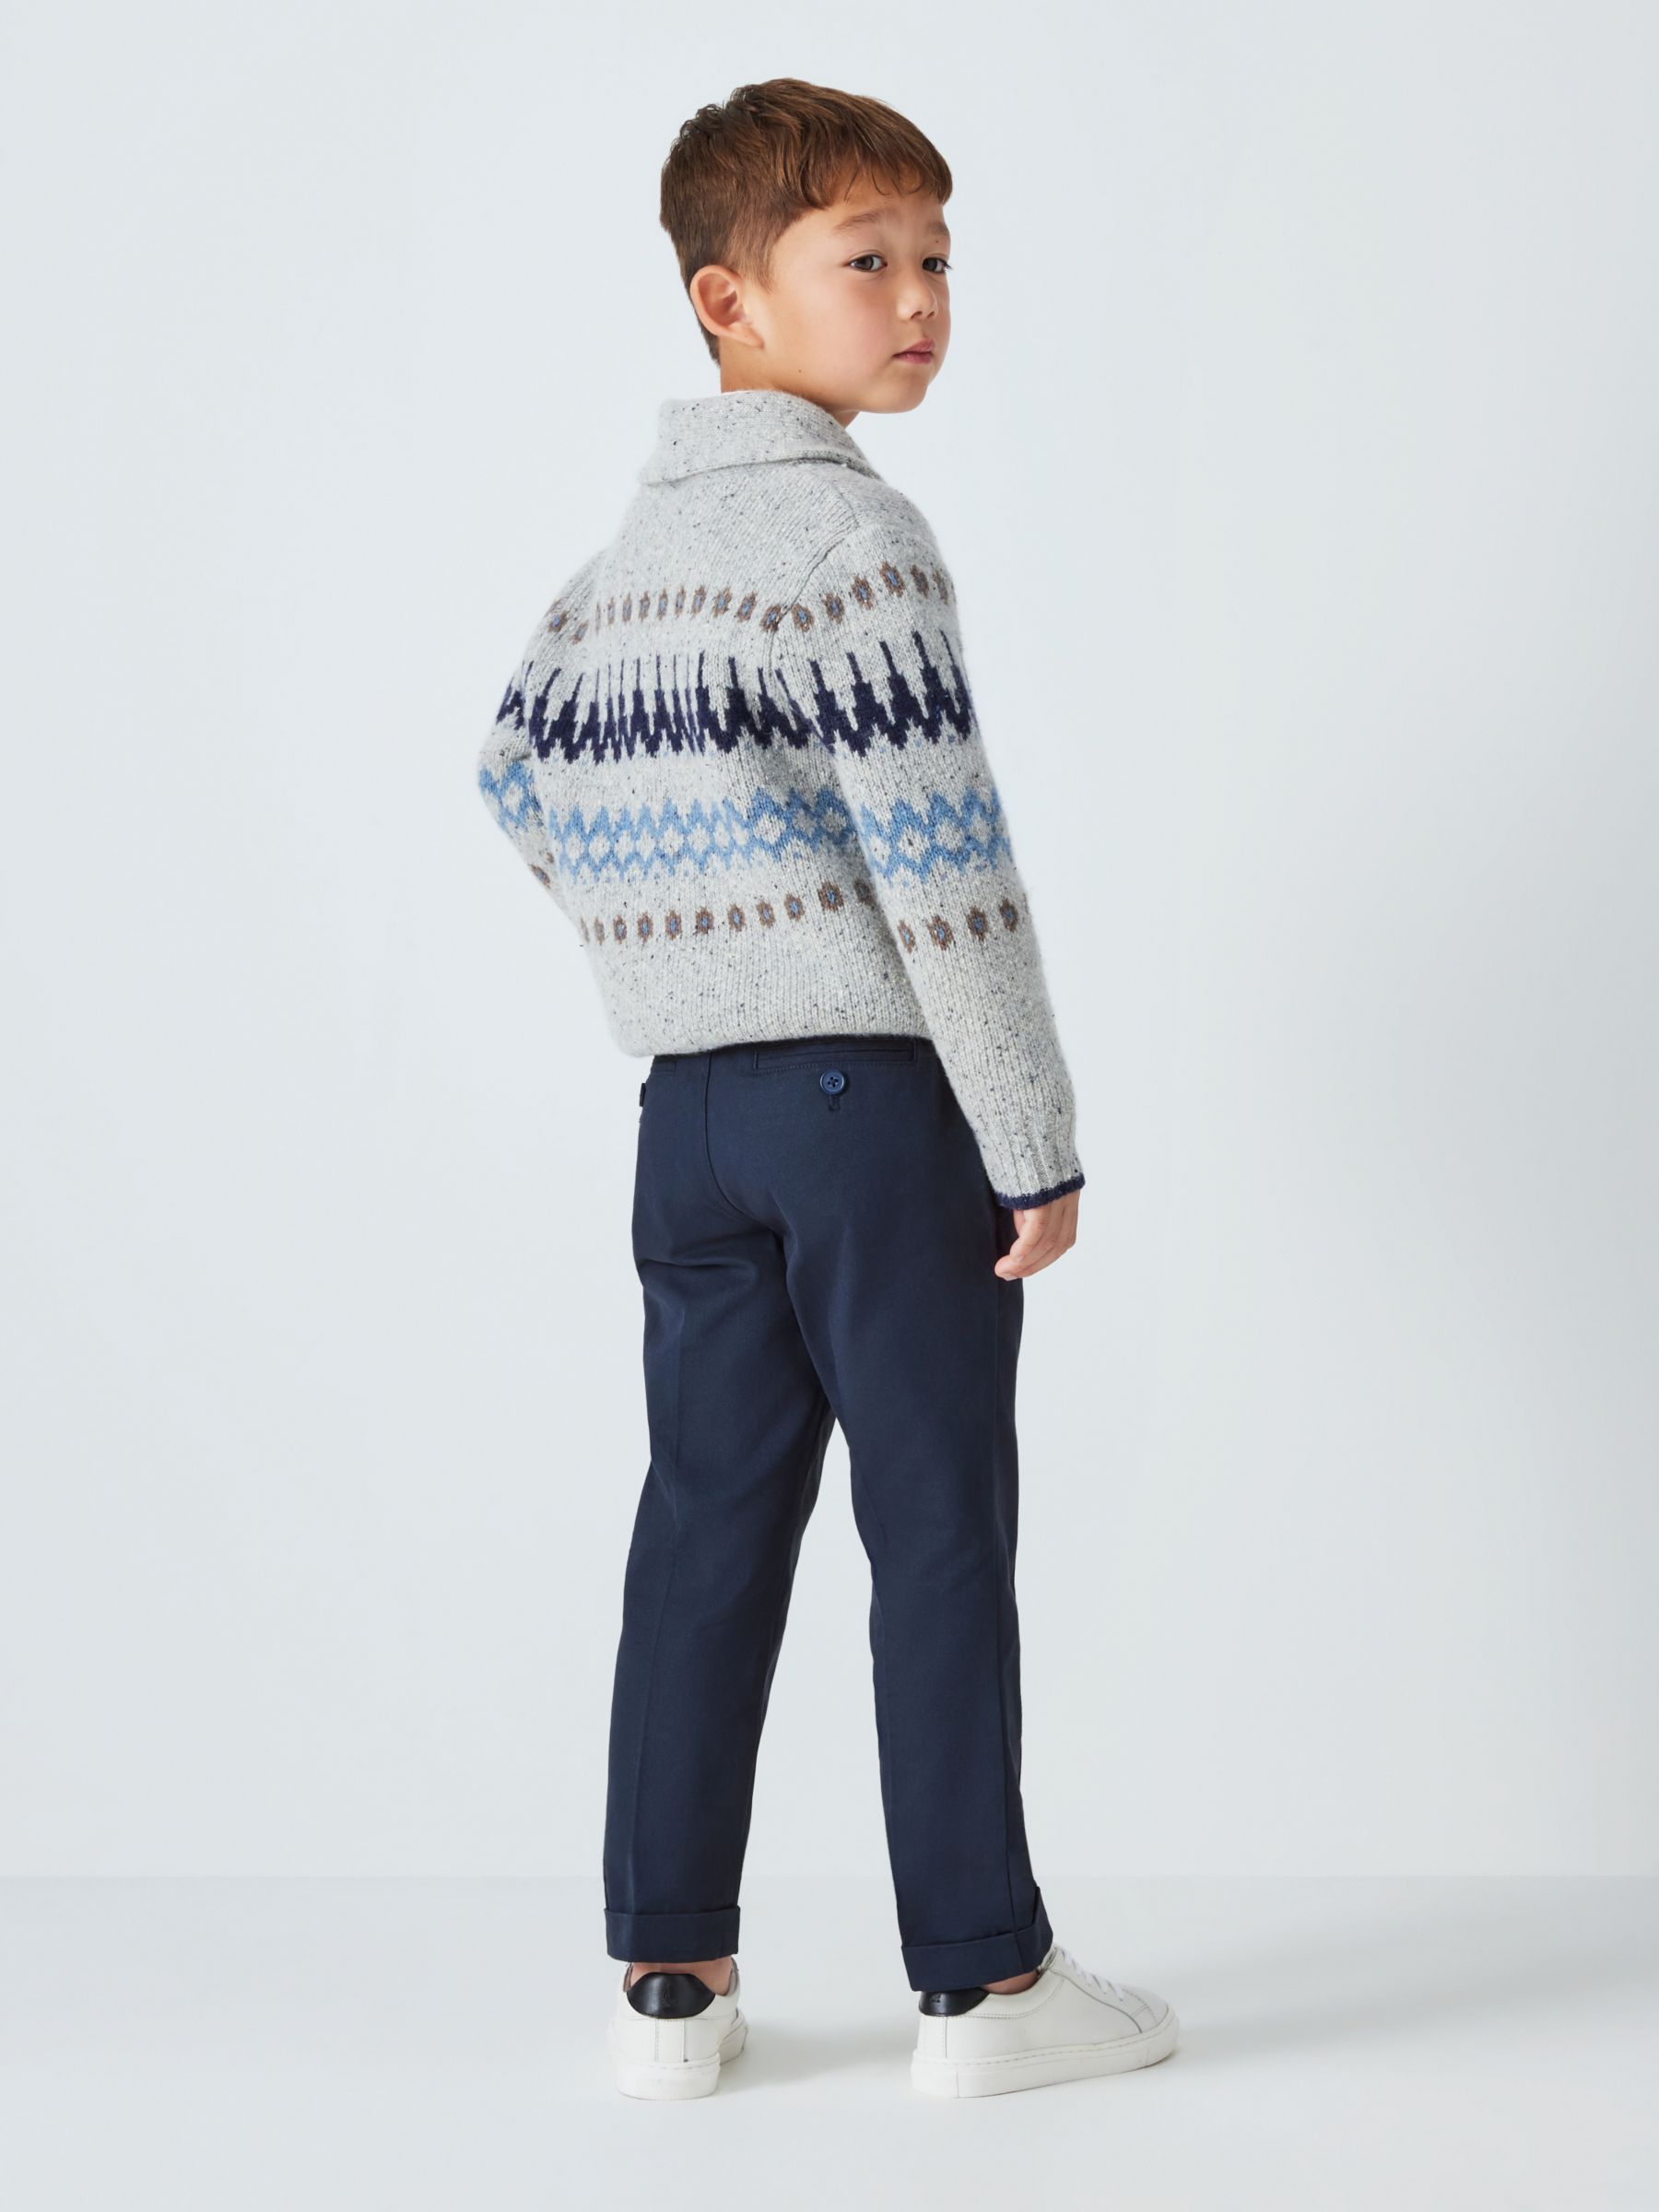 John Lewis Heirloom Collection Kids' Chino Trousers, Navy, 2 years